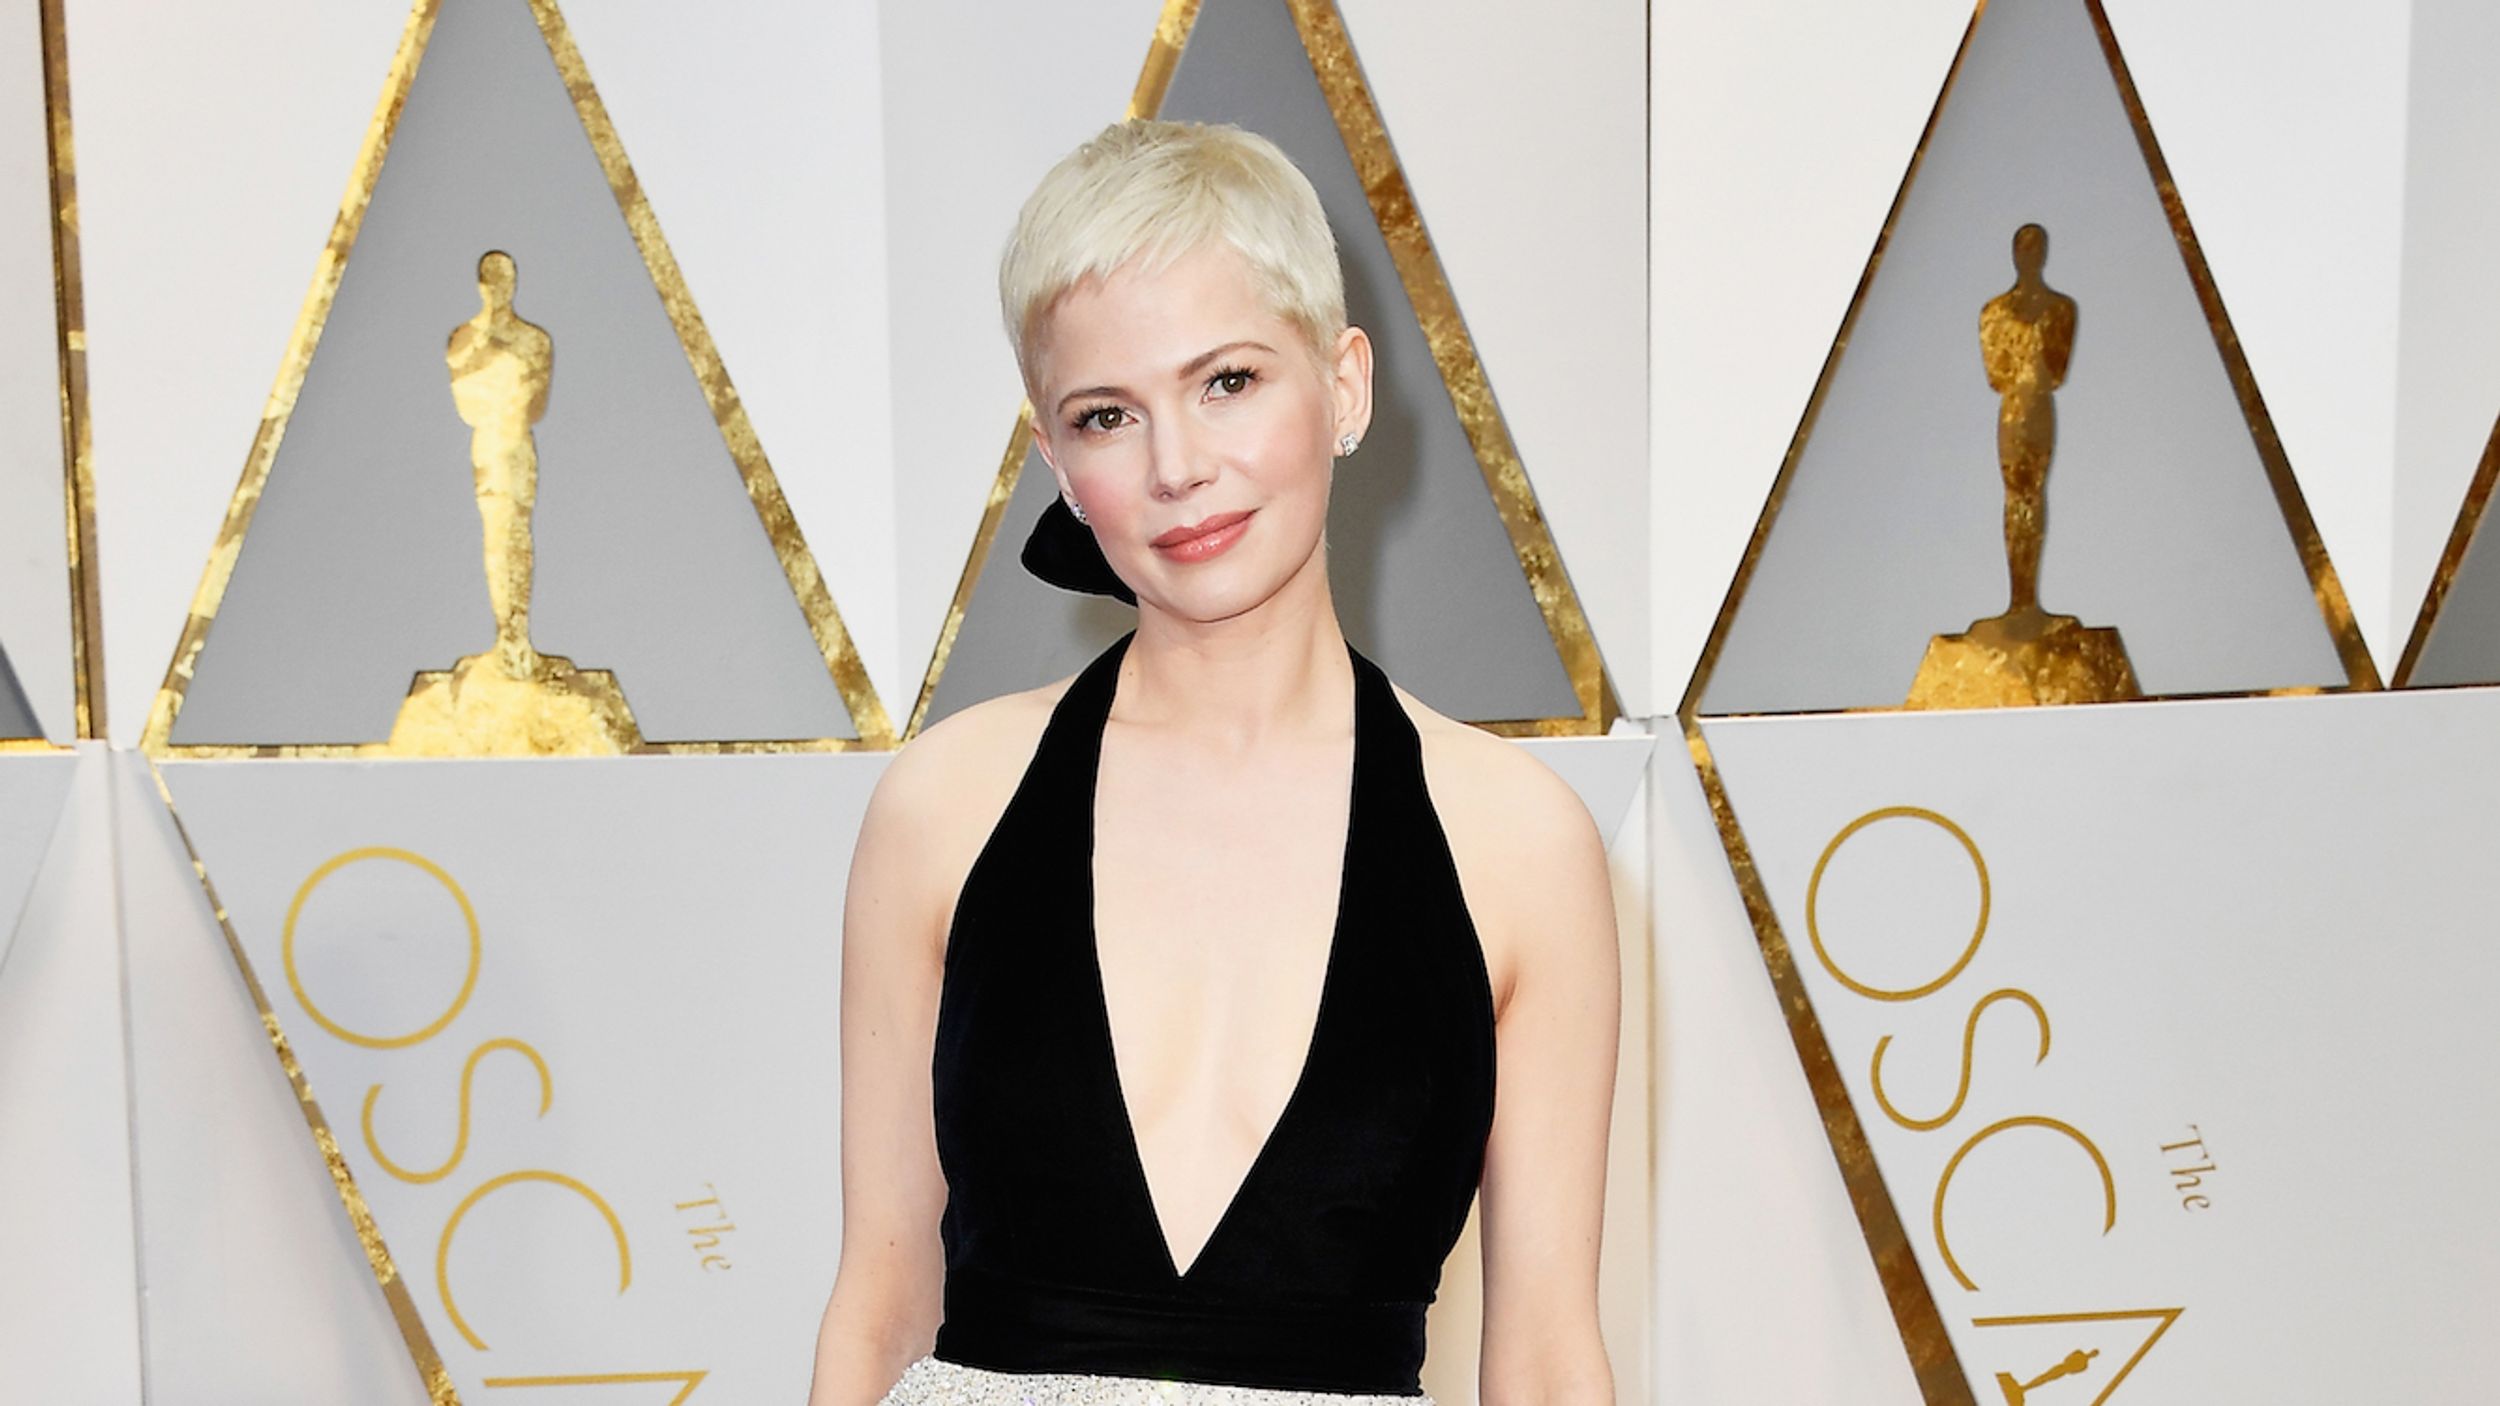 The Oscars Red Carpet Will Make You Want a Haircut